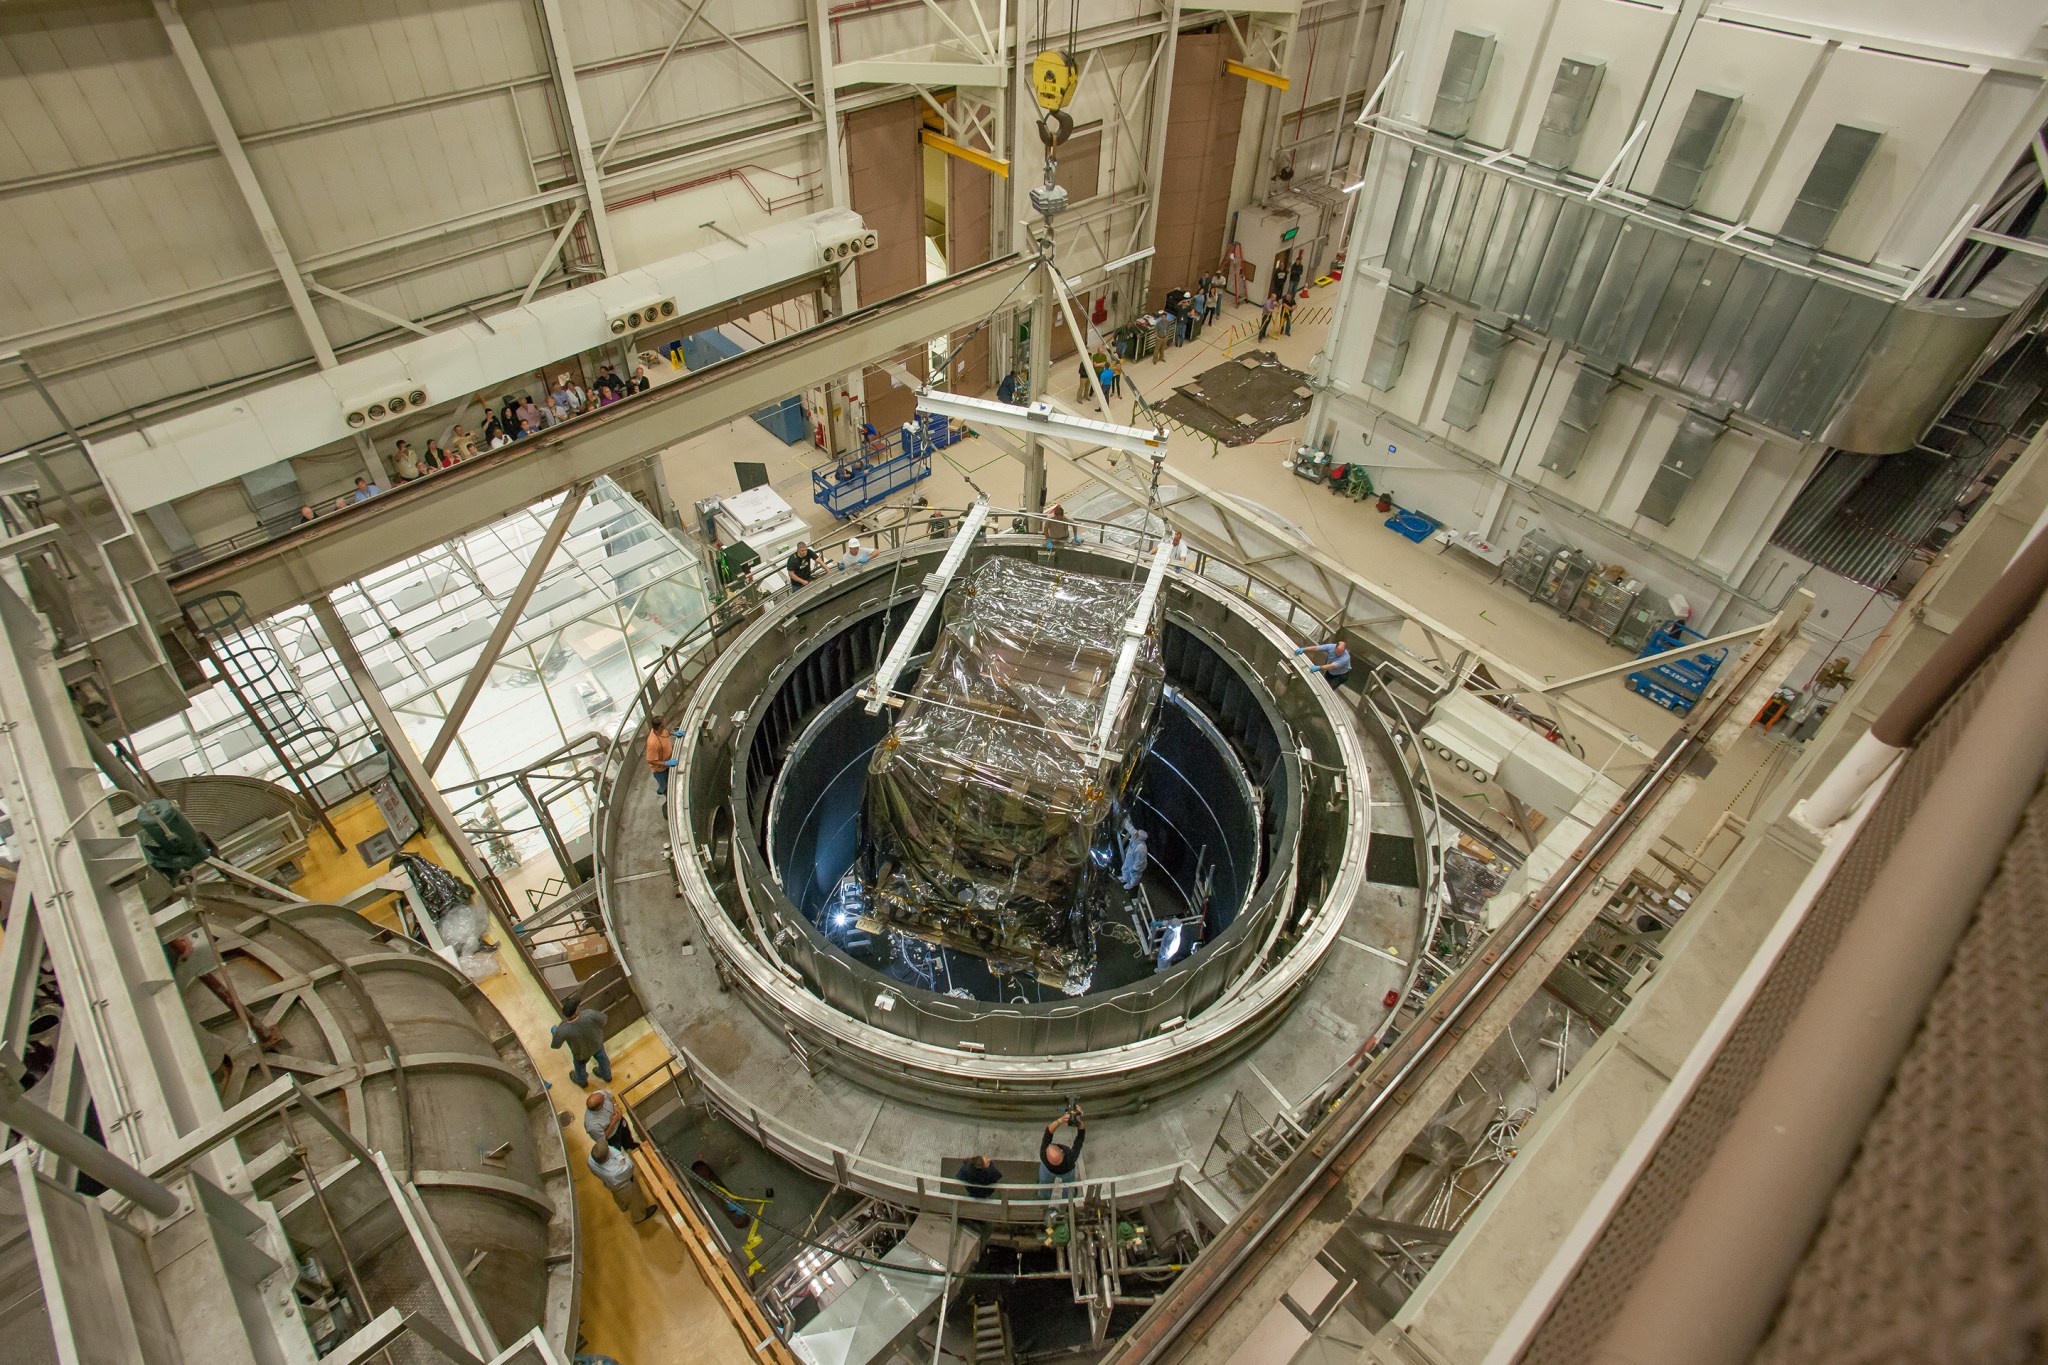 A crane lowers the heart of the James Webb Space Telescope into the Goddard Thermal Vacuum Chamber where it will spend 116 days in a space-like environment.